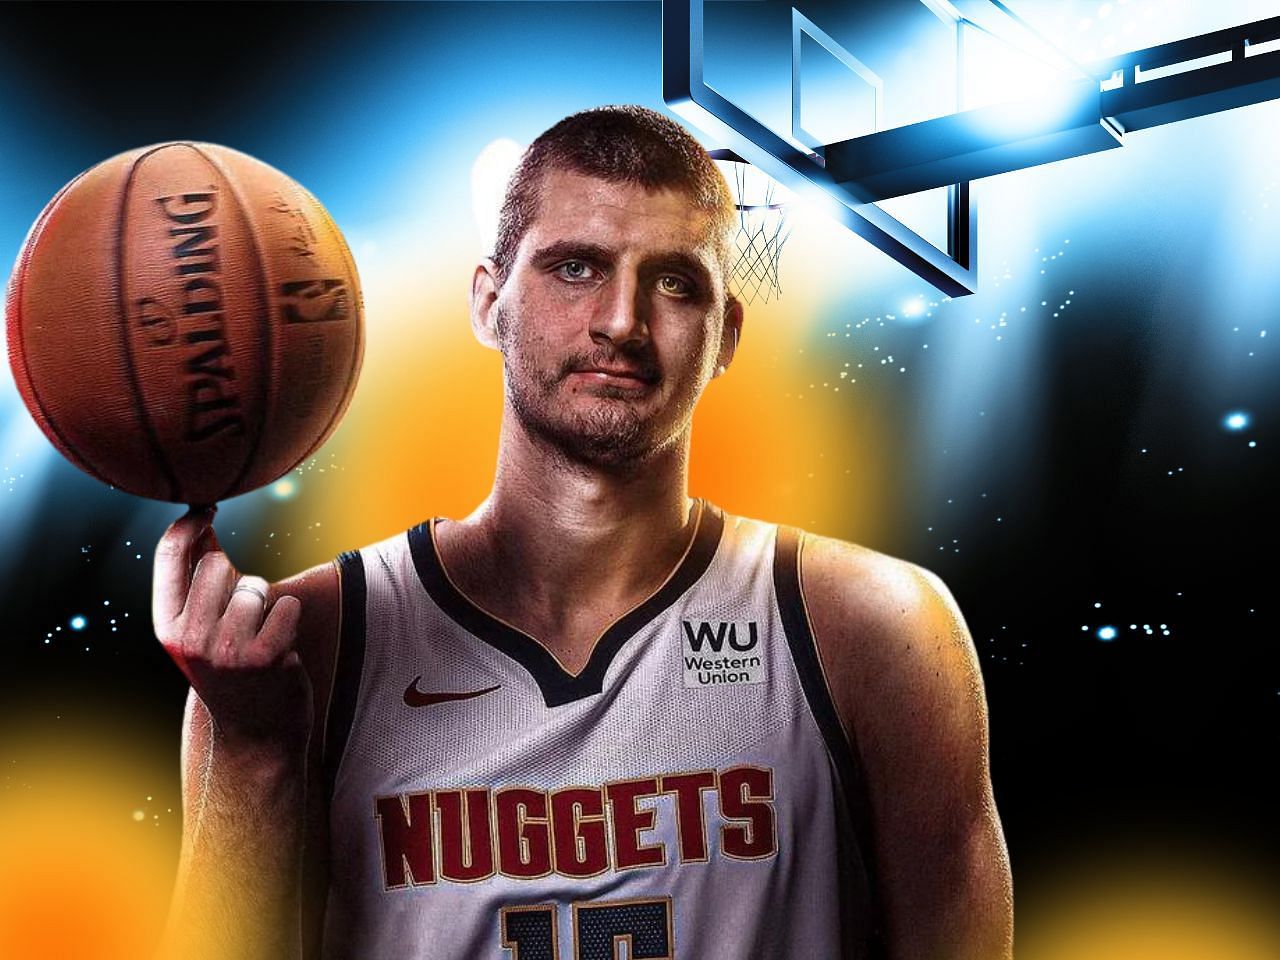 Time traveler in 2005 predicts Nikola Jokic would be the best player in the NBA